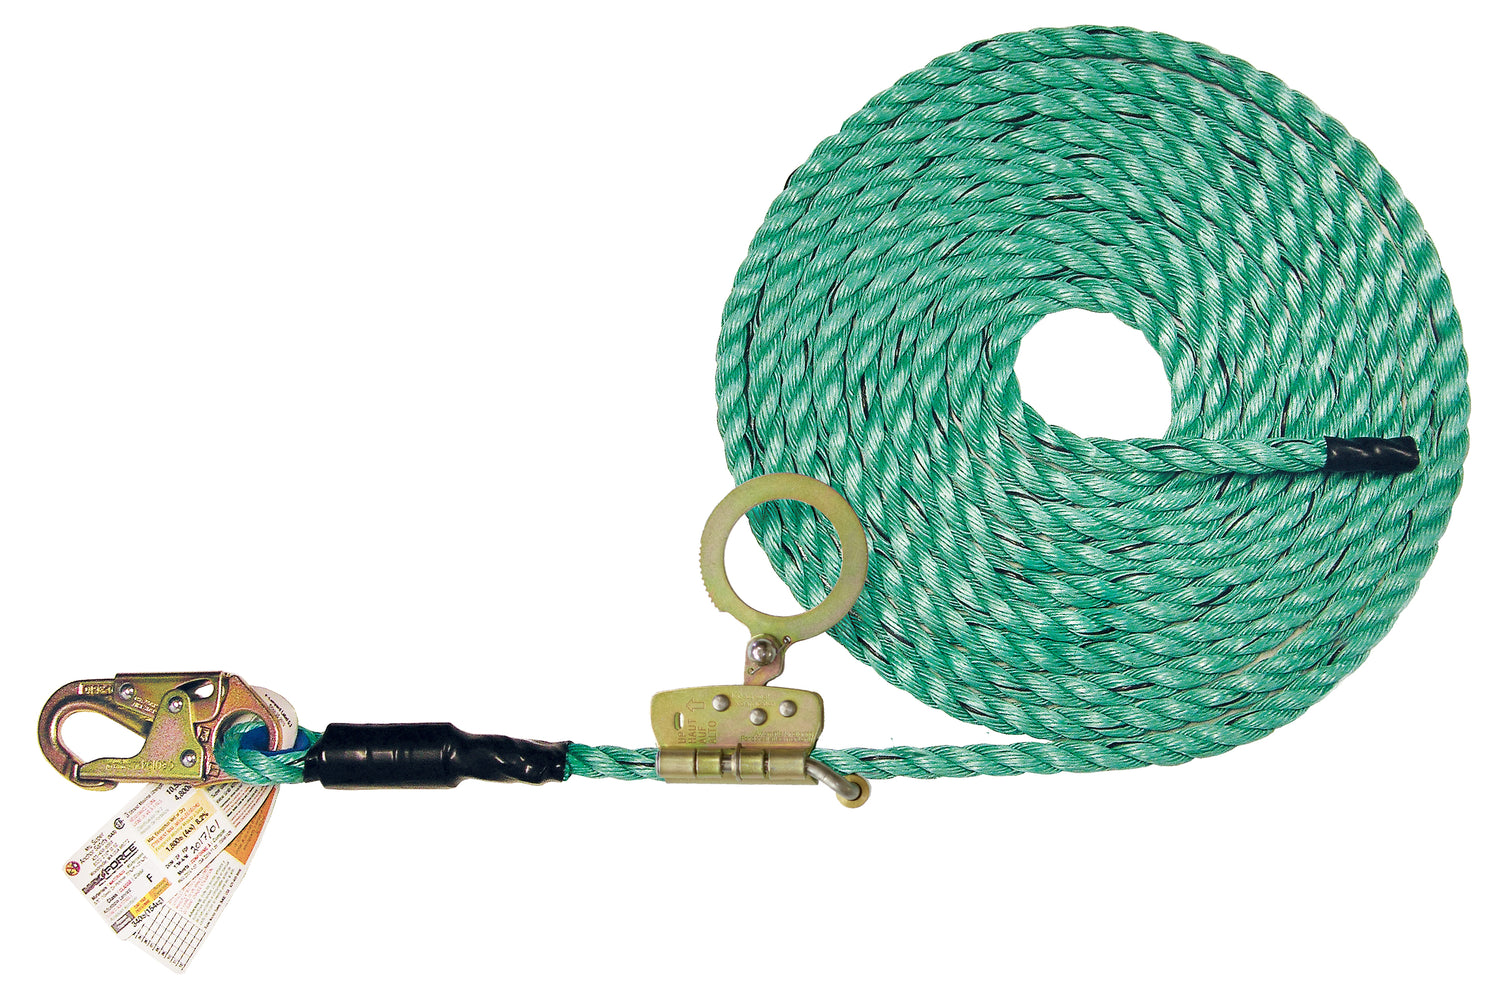 Super Anchor 25' Maxima Lifeline with Snaphook and ADP Fall Arrestor 4084-25Z